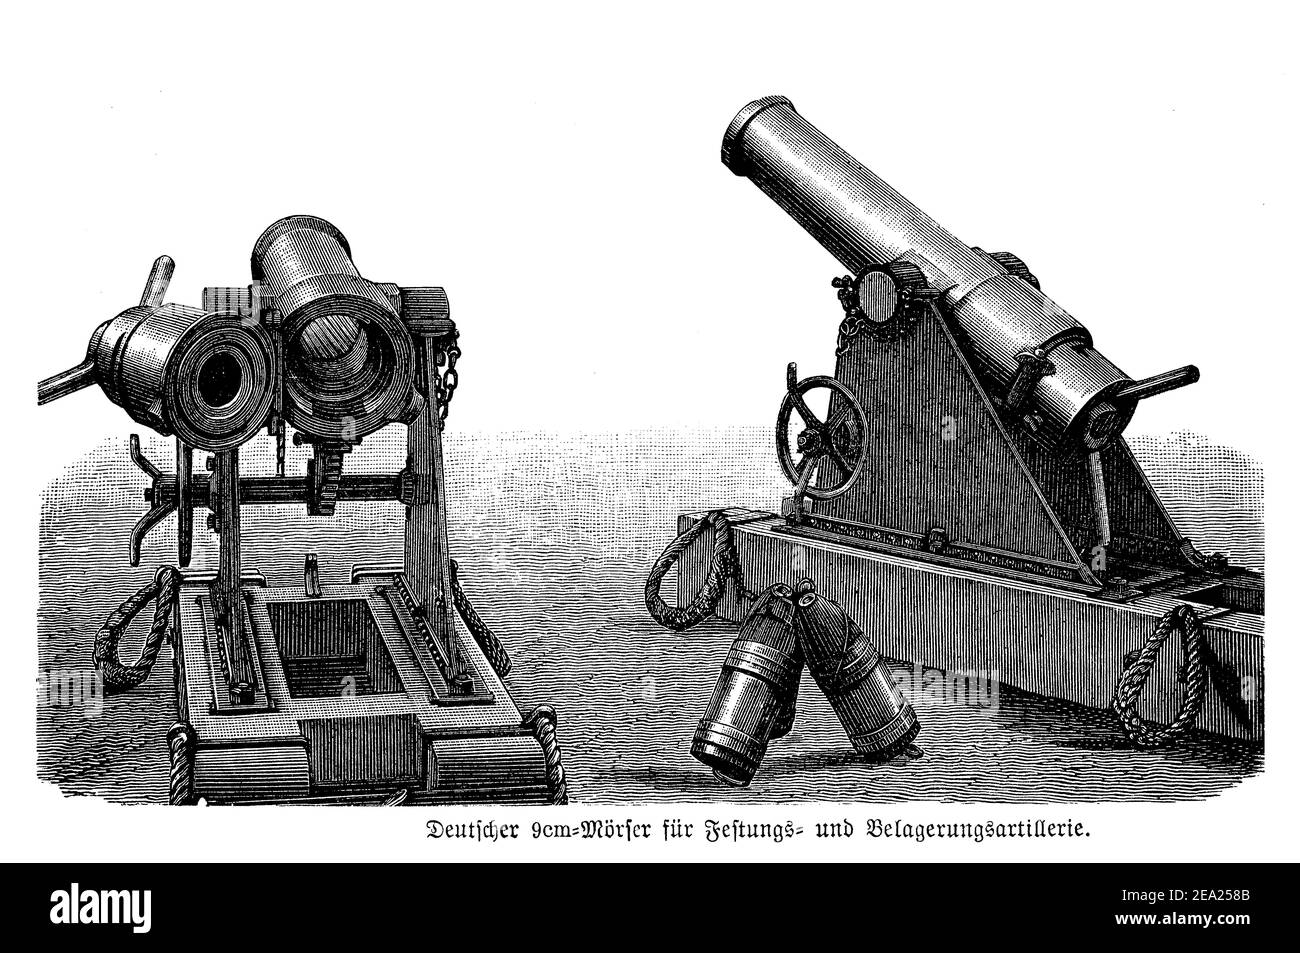 German mortar, mounted gun for military fortification defense, end 19th century Stock Photo